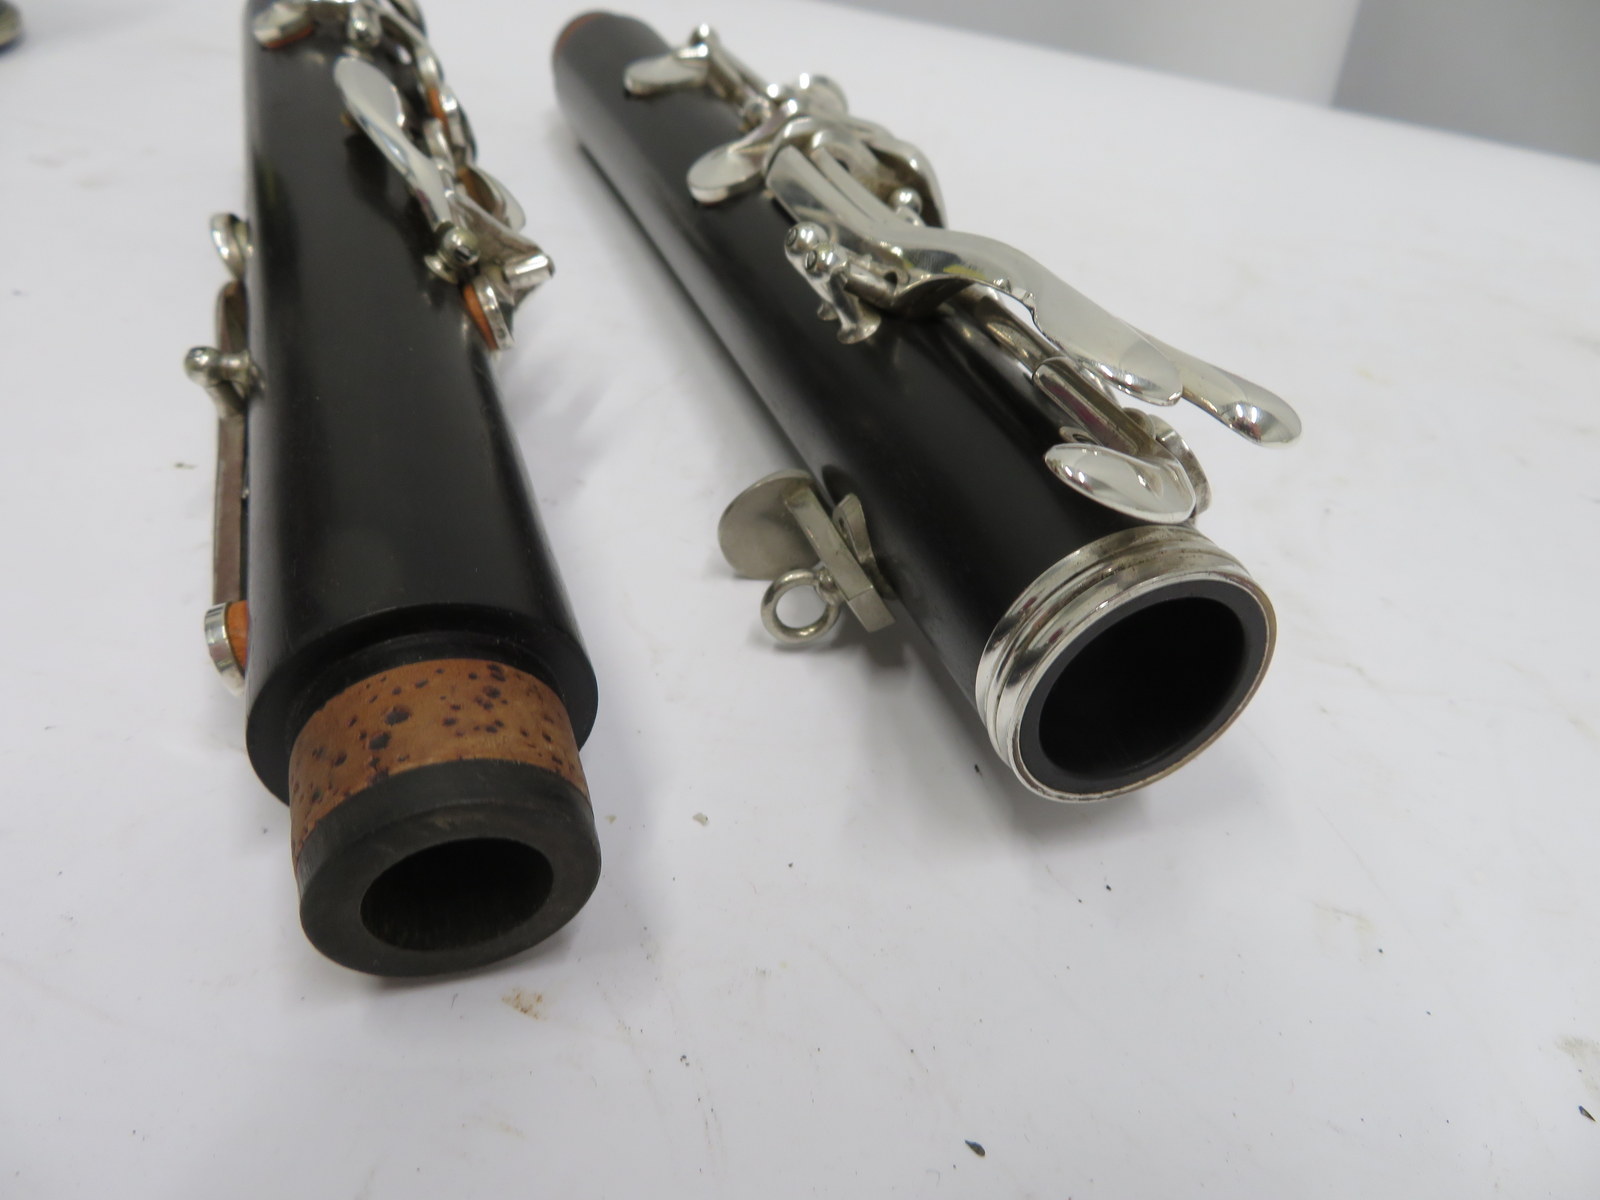 Buffet Crampon R13 clarinet with case. Serial number: 524961. - Image 16 of 17